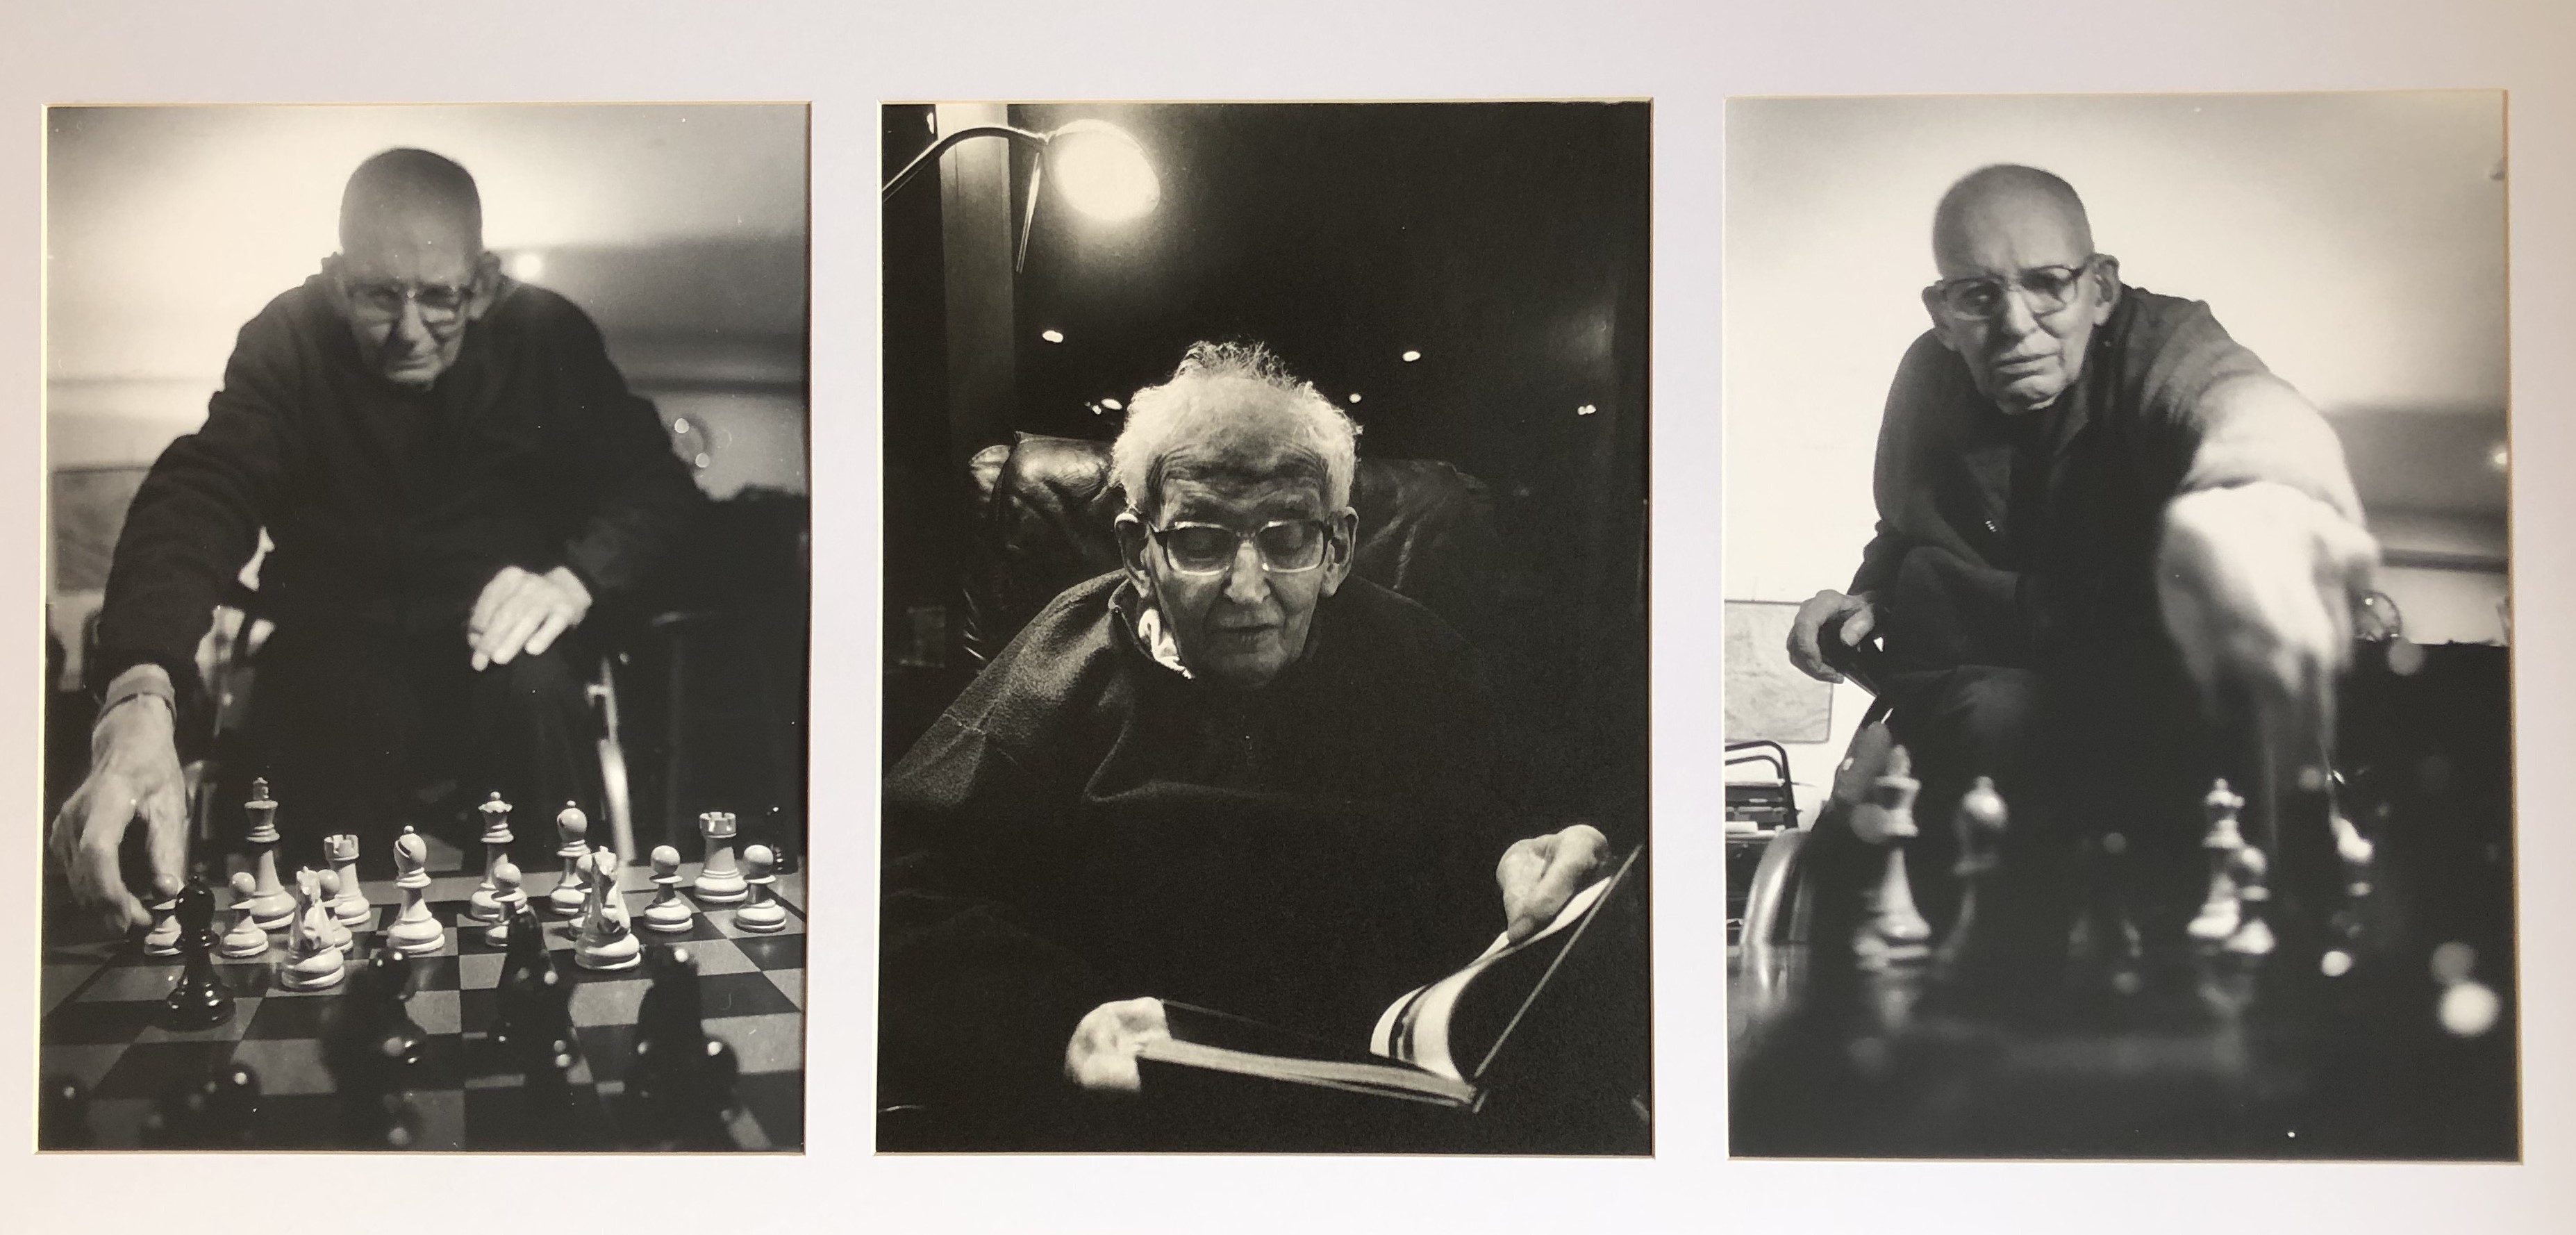 A triptych showing my father at age 93. The left and right images are of him playing chess. The centre panel shows him reading under a strong light.